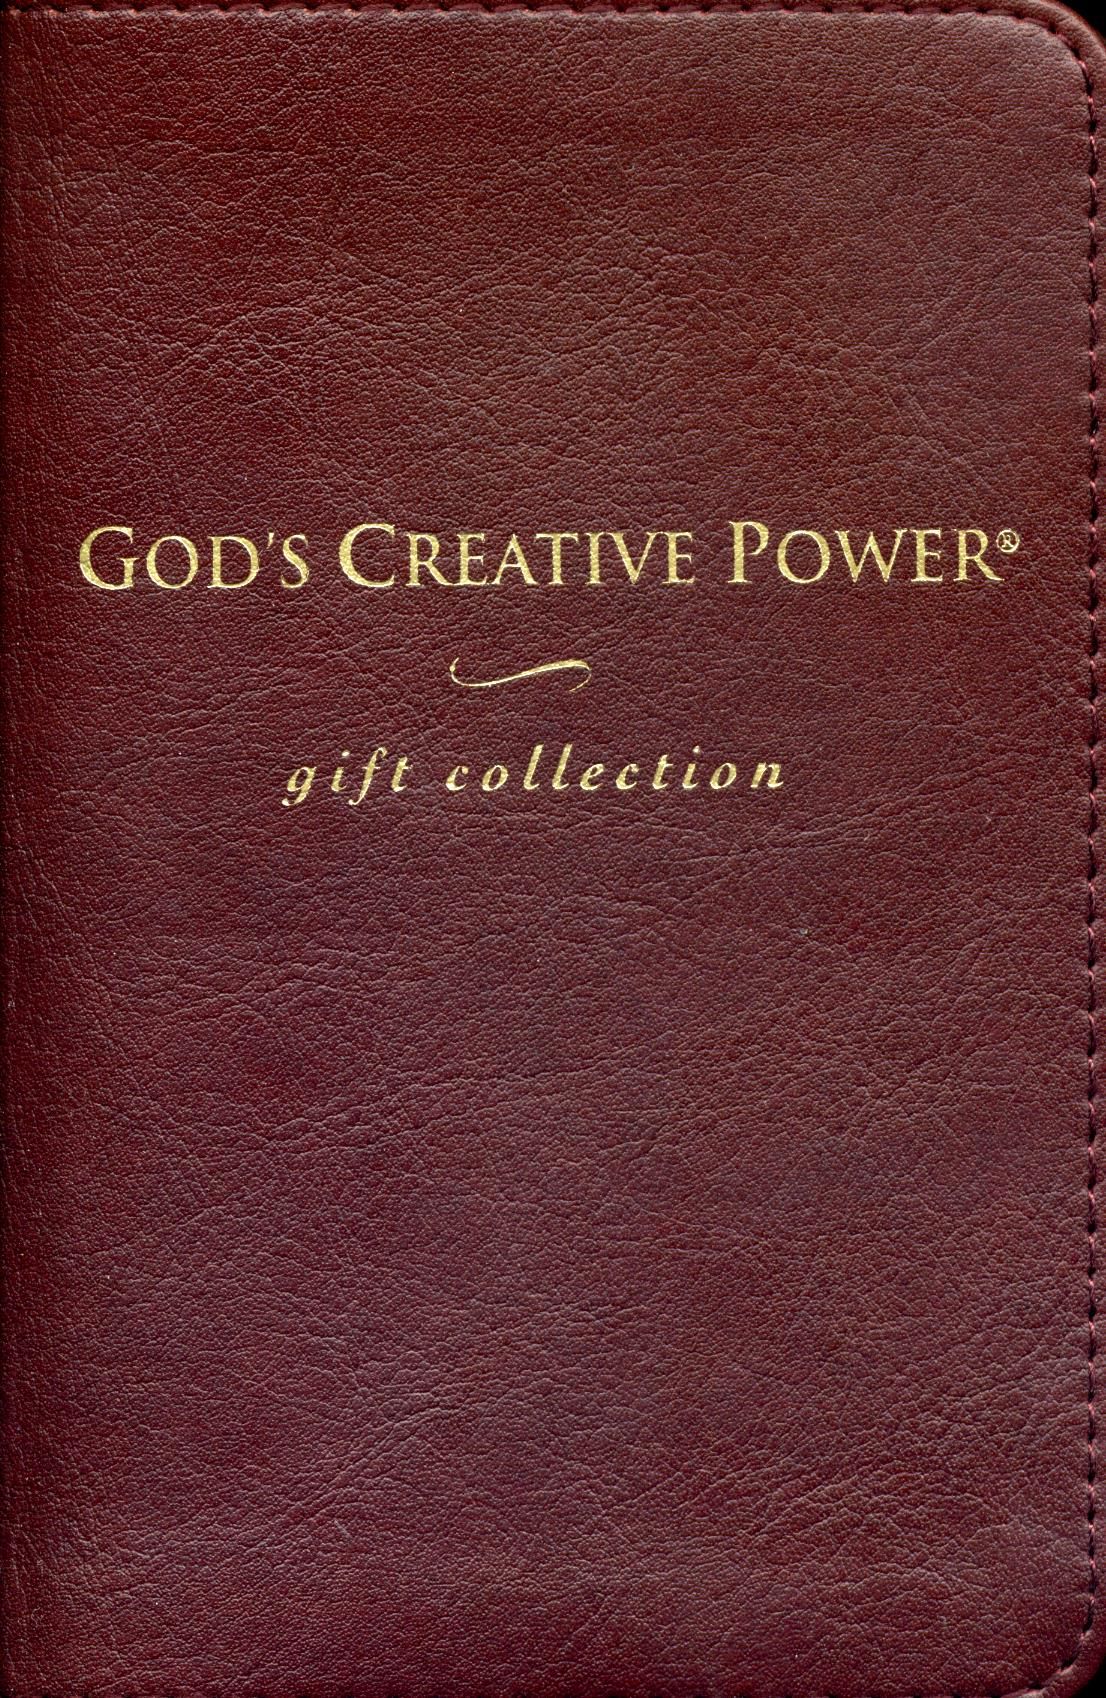 Englische Bücher - Charles Capps: God's Creative Power- gift  collection (3 books in one)